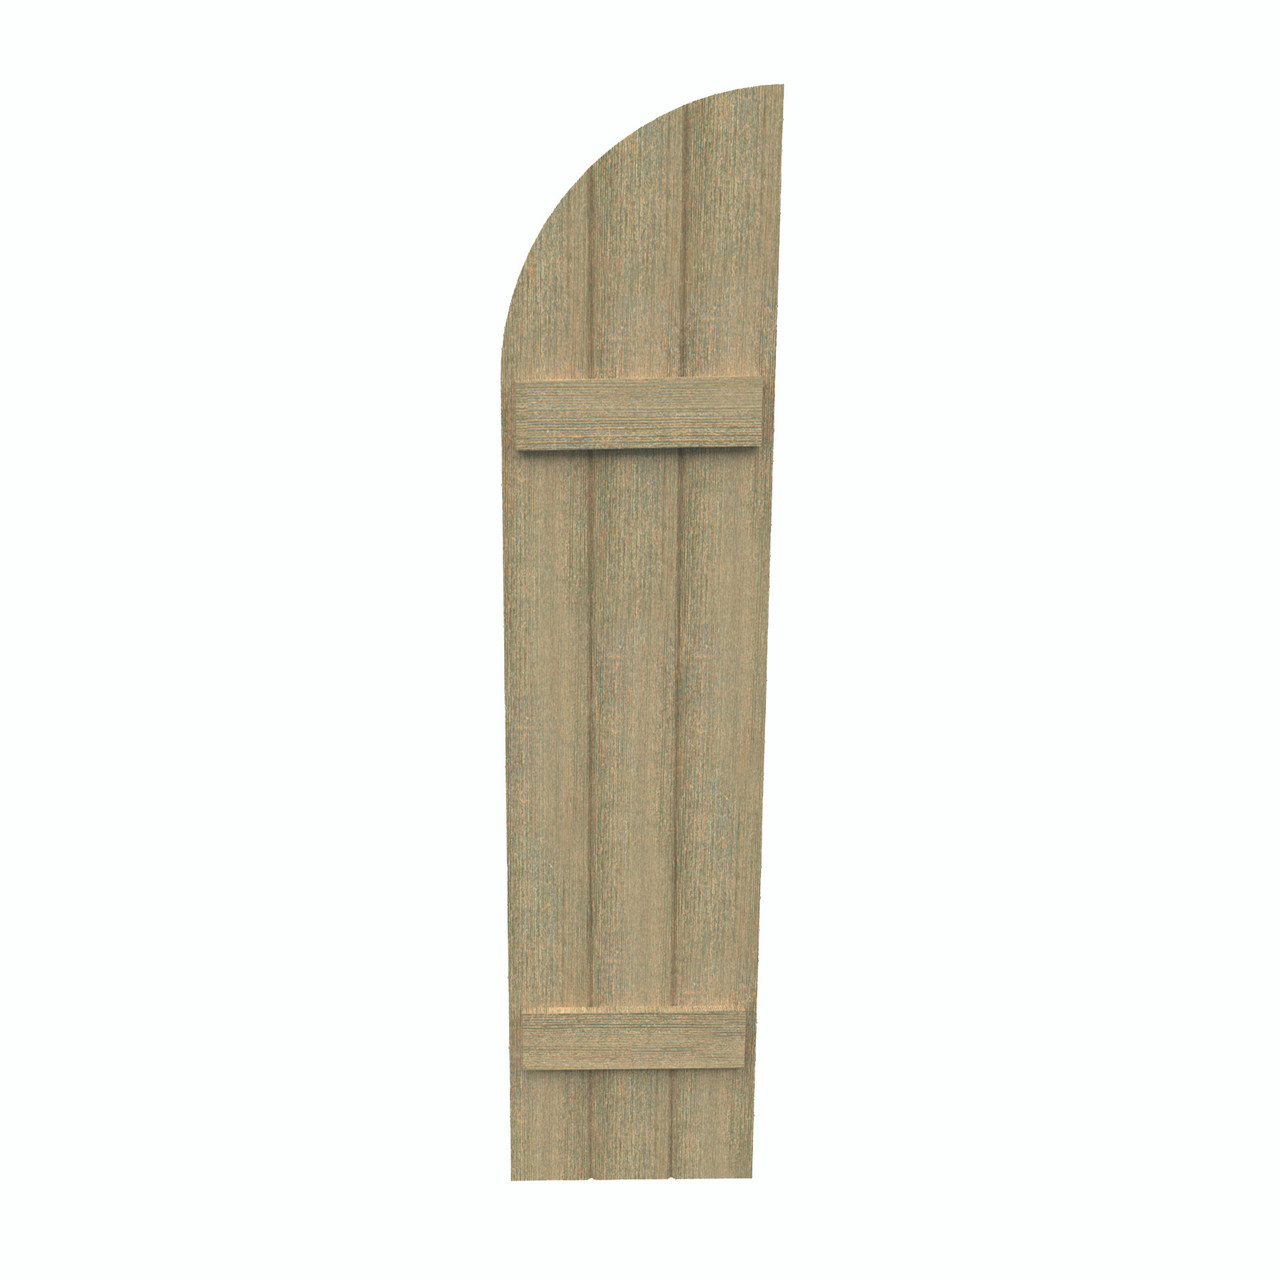 18 inch by 67 inch Quarter Round Shutter with 3-Boards